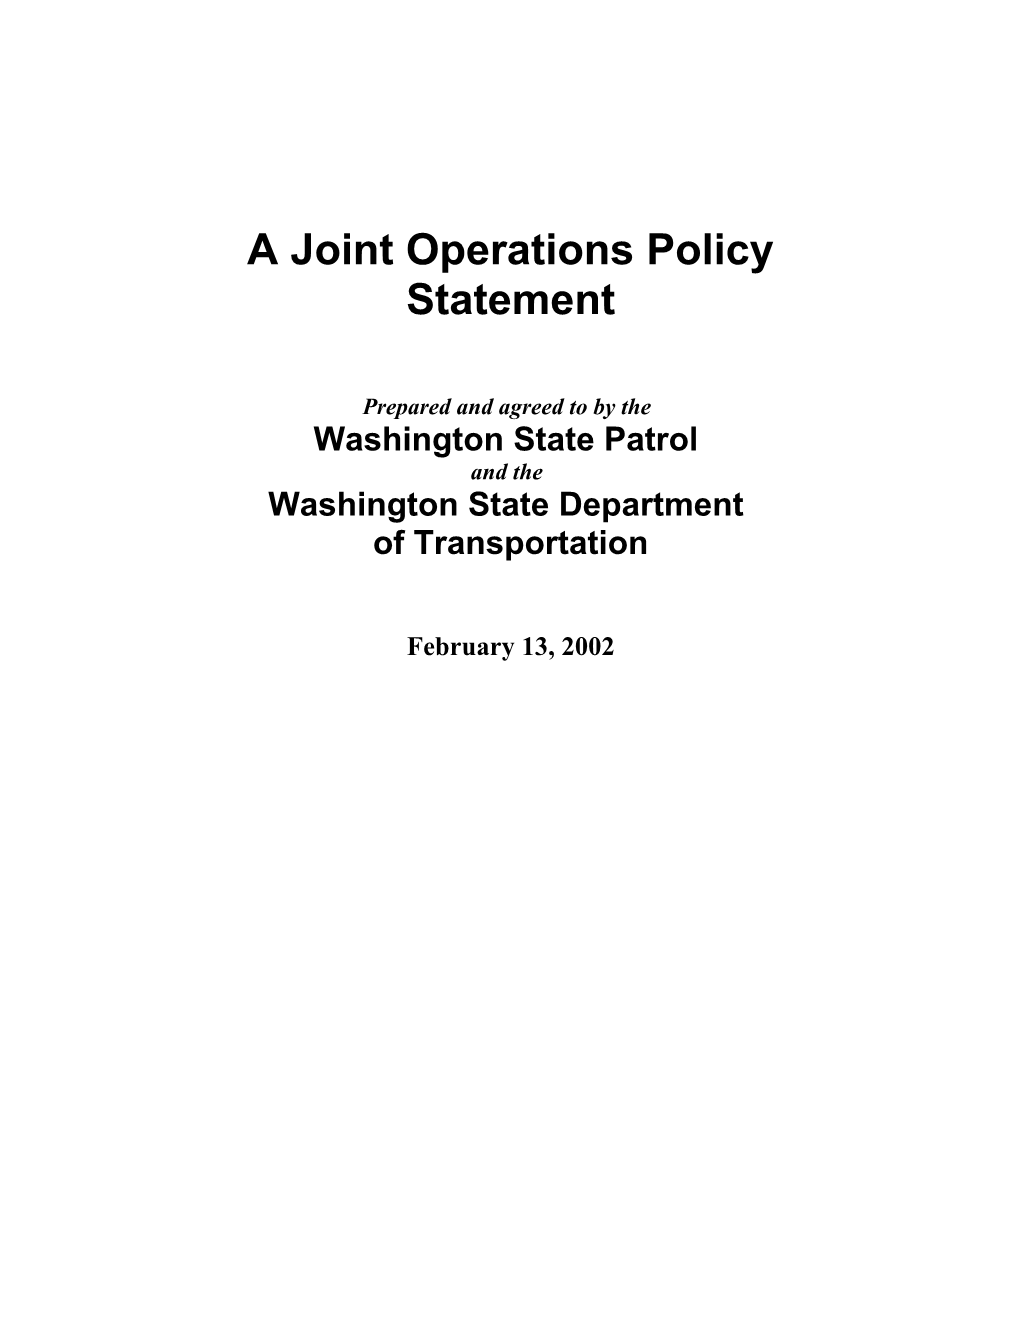 A Joint Operations Policy Statement